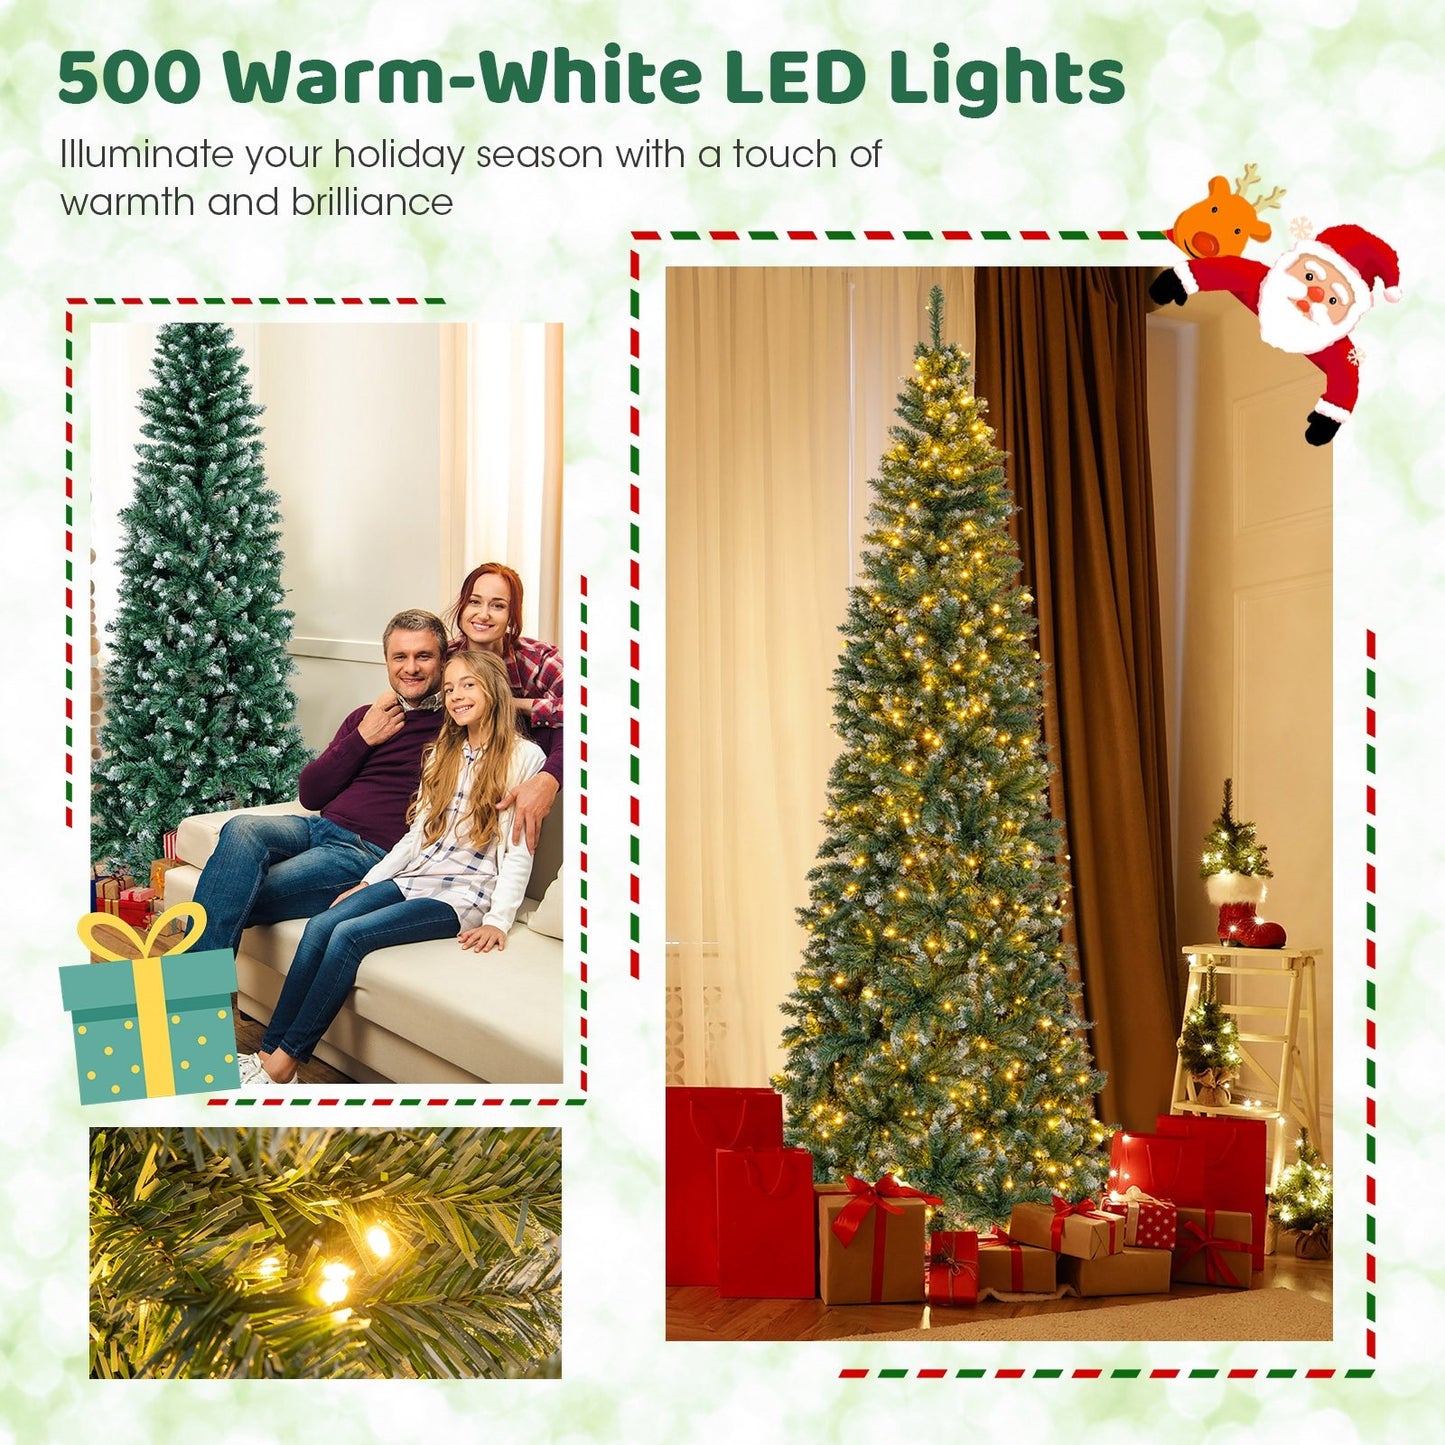 9 FT Pre-Lit Artificial Christmas Tree with 1298 Snowy Branch Tips, Green